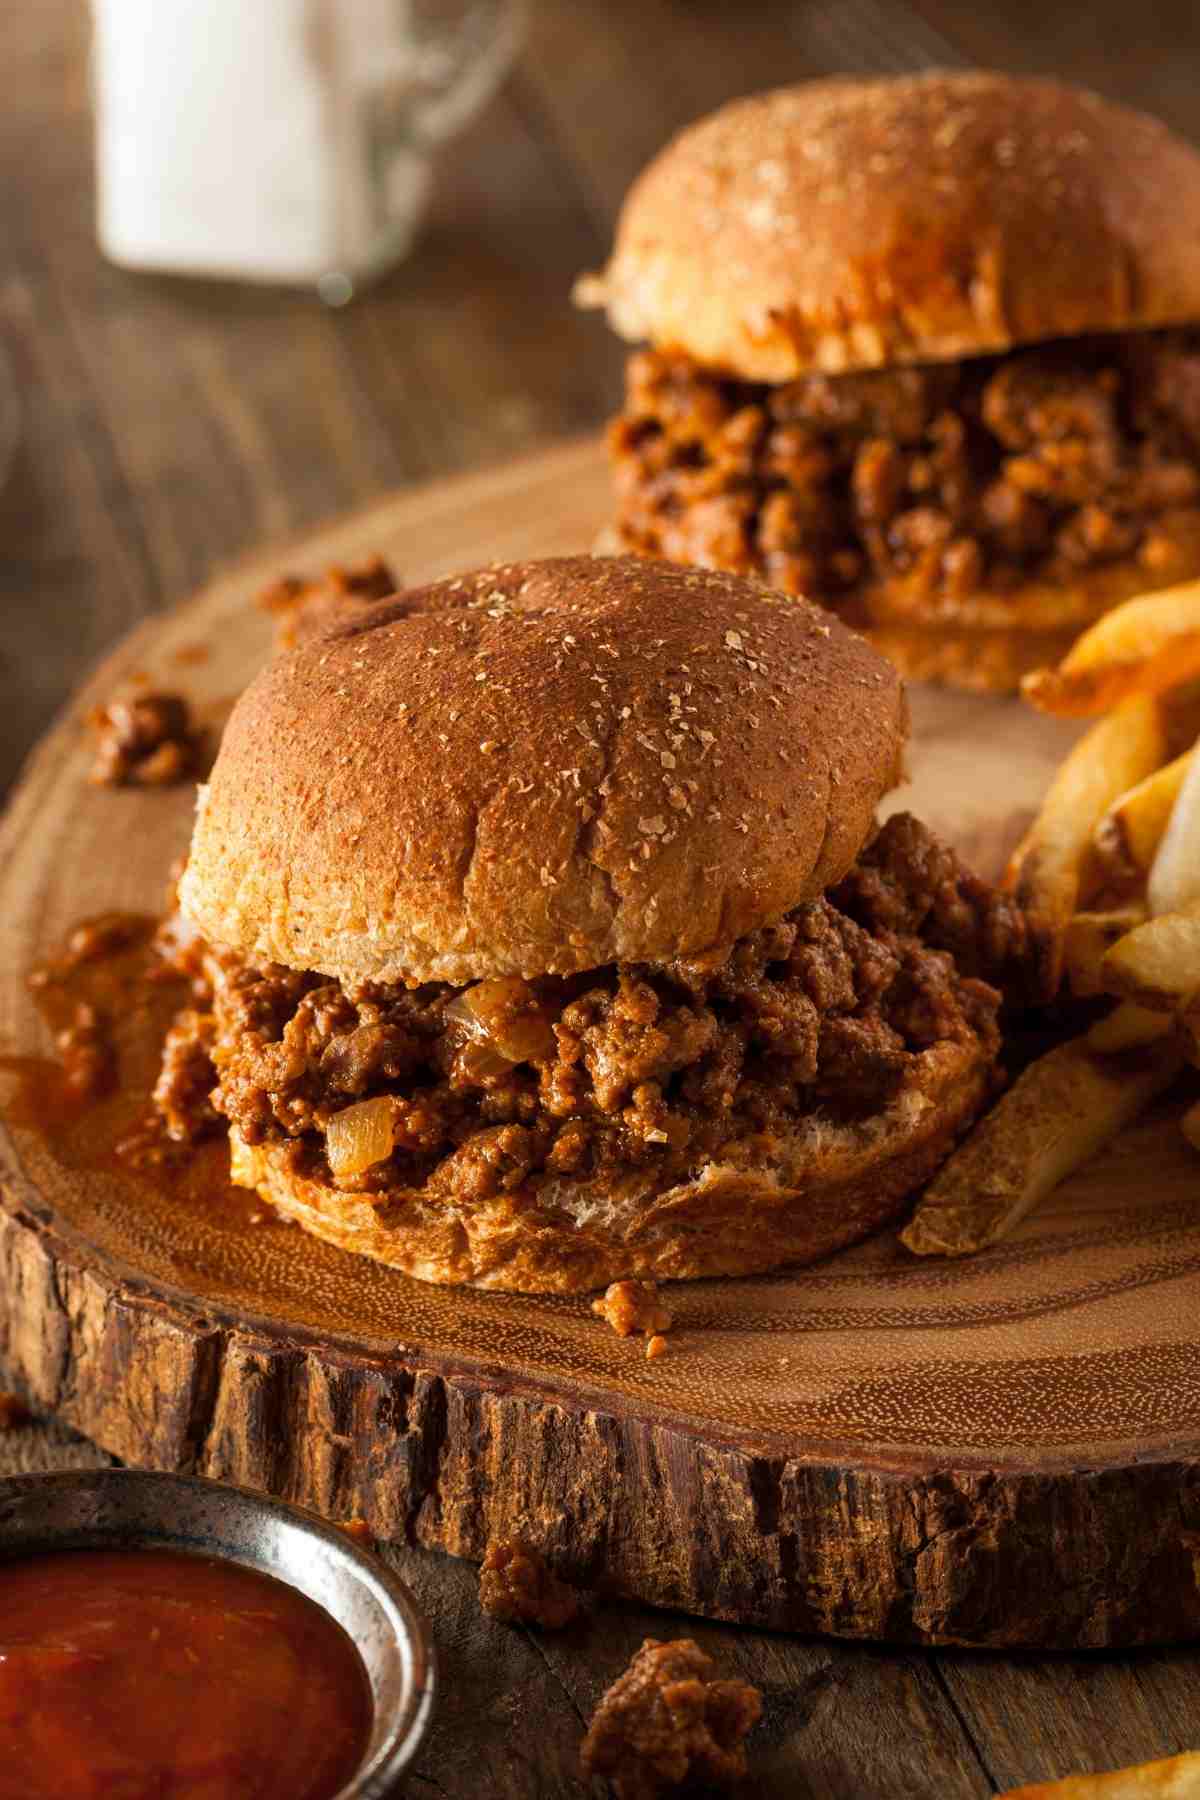 These Homemade Sloppy Joes are a hit with kids and adults alike. The ground beef is seasoned with onion and garlic and cooked in a delicious sauce that’s sweet and tangy. Serve it on toasted hamburger buns and you’re good to go!